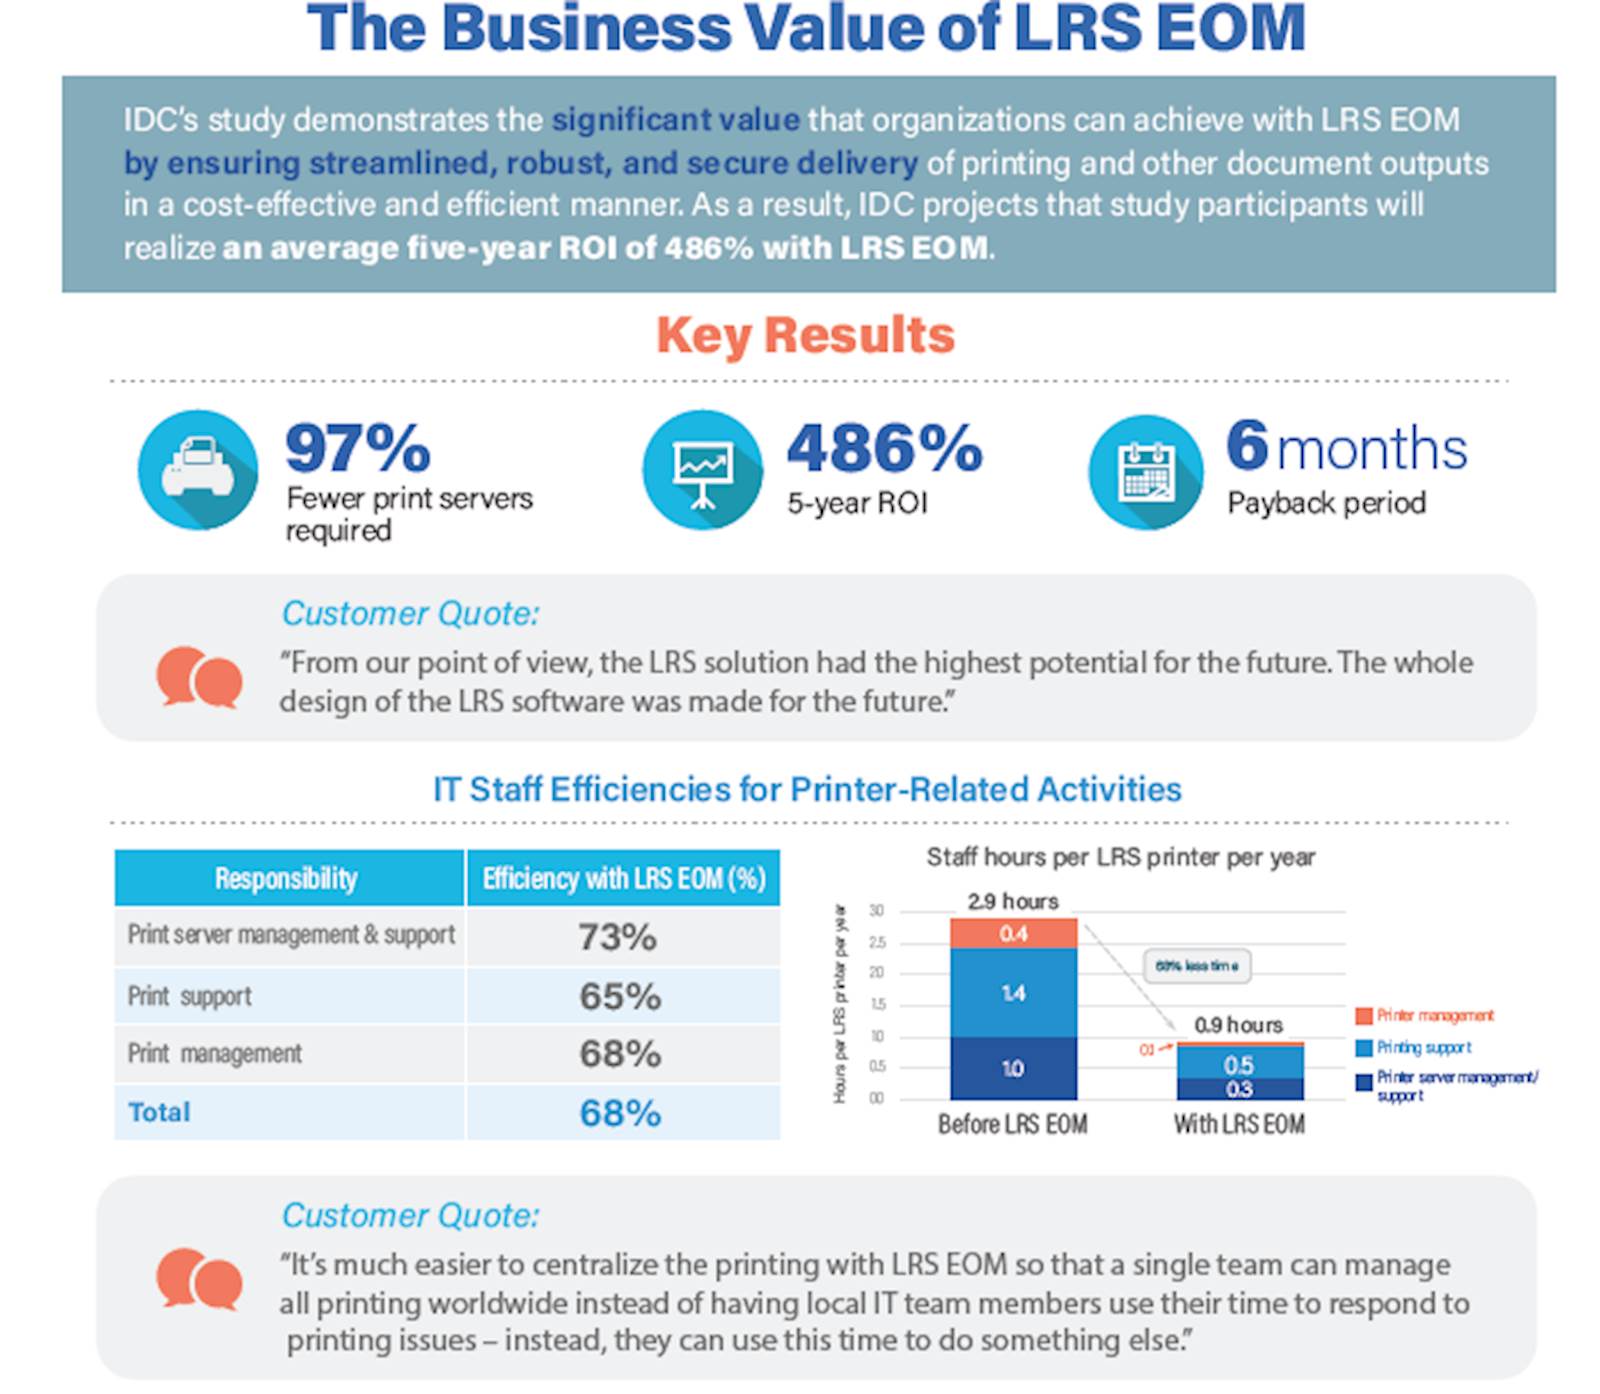 Infographic showing the business value of LRS EOM